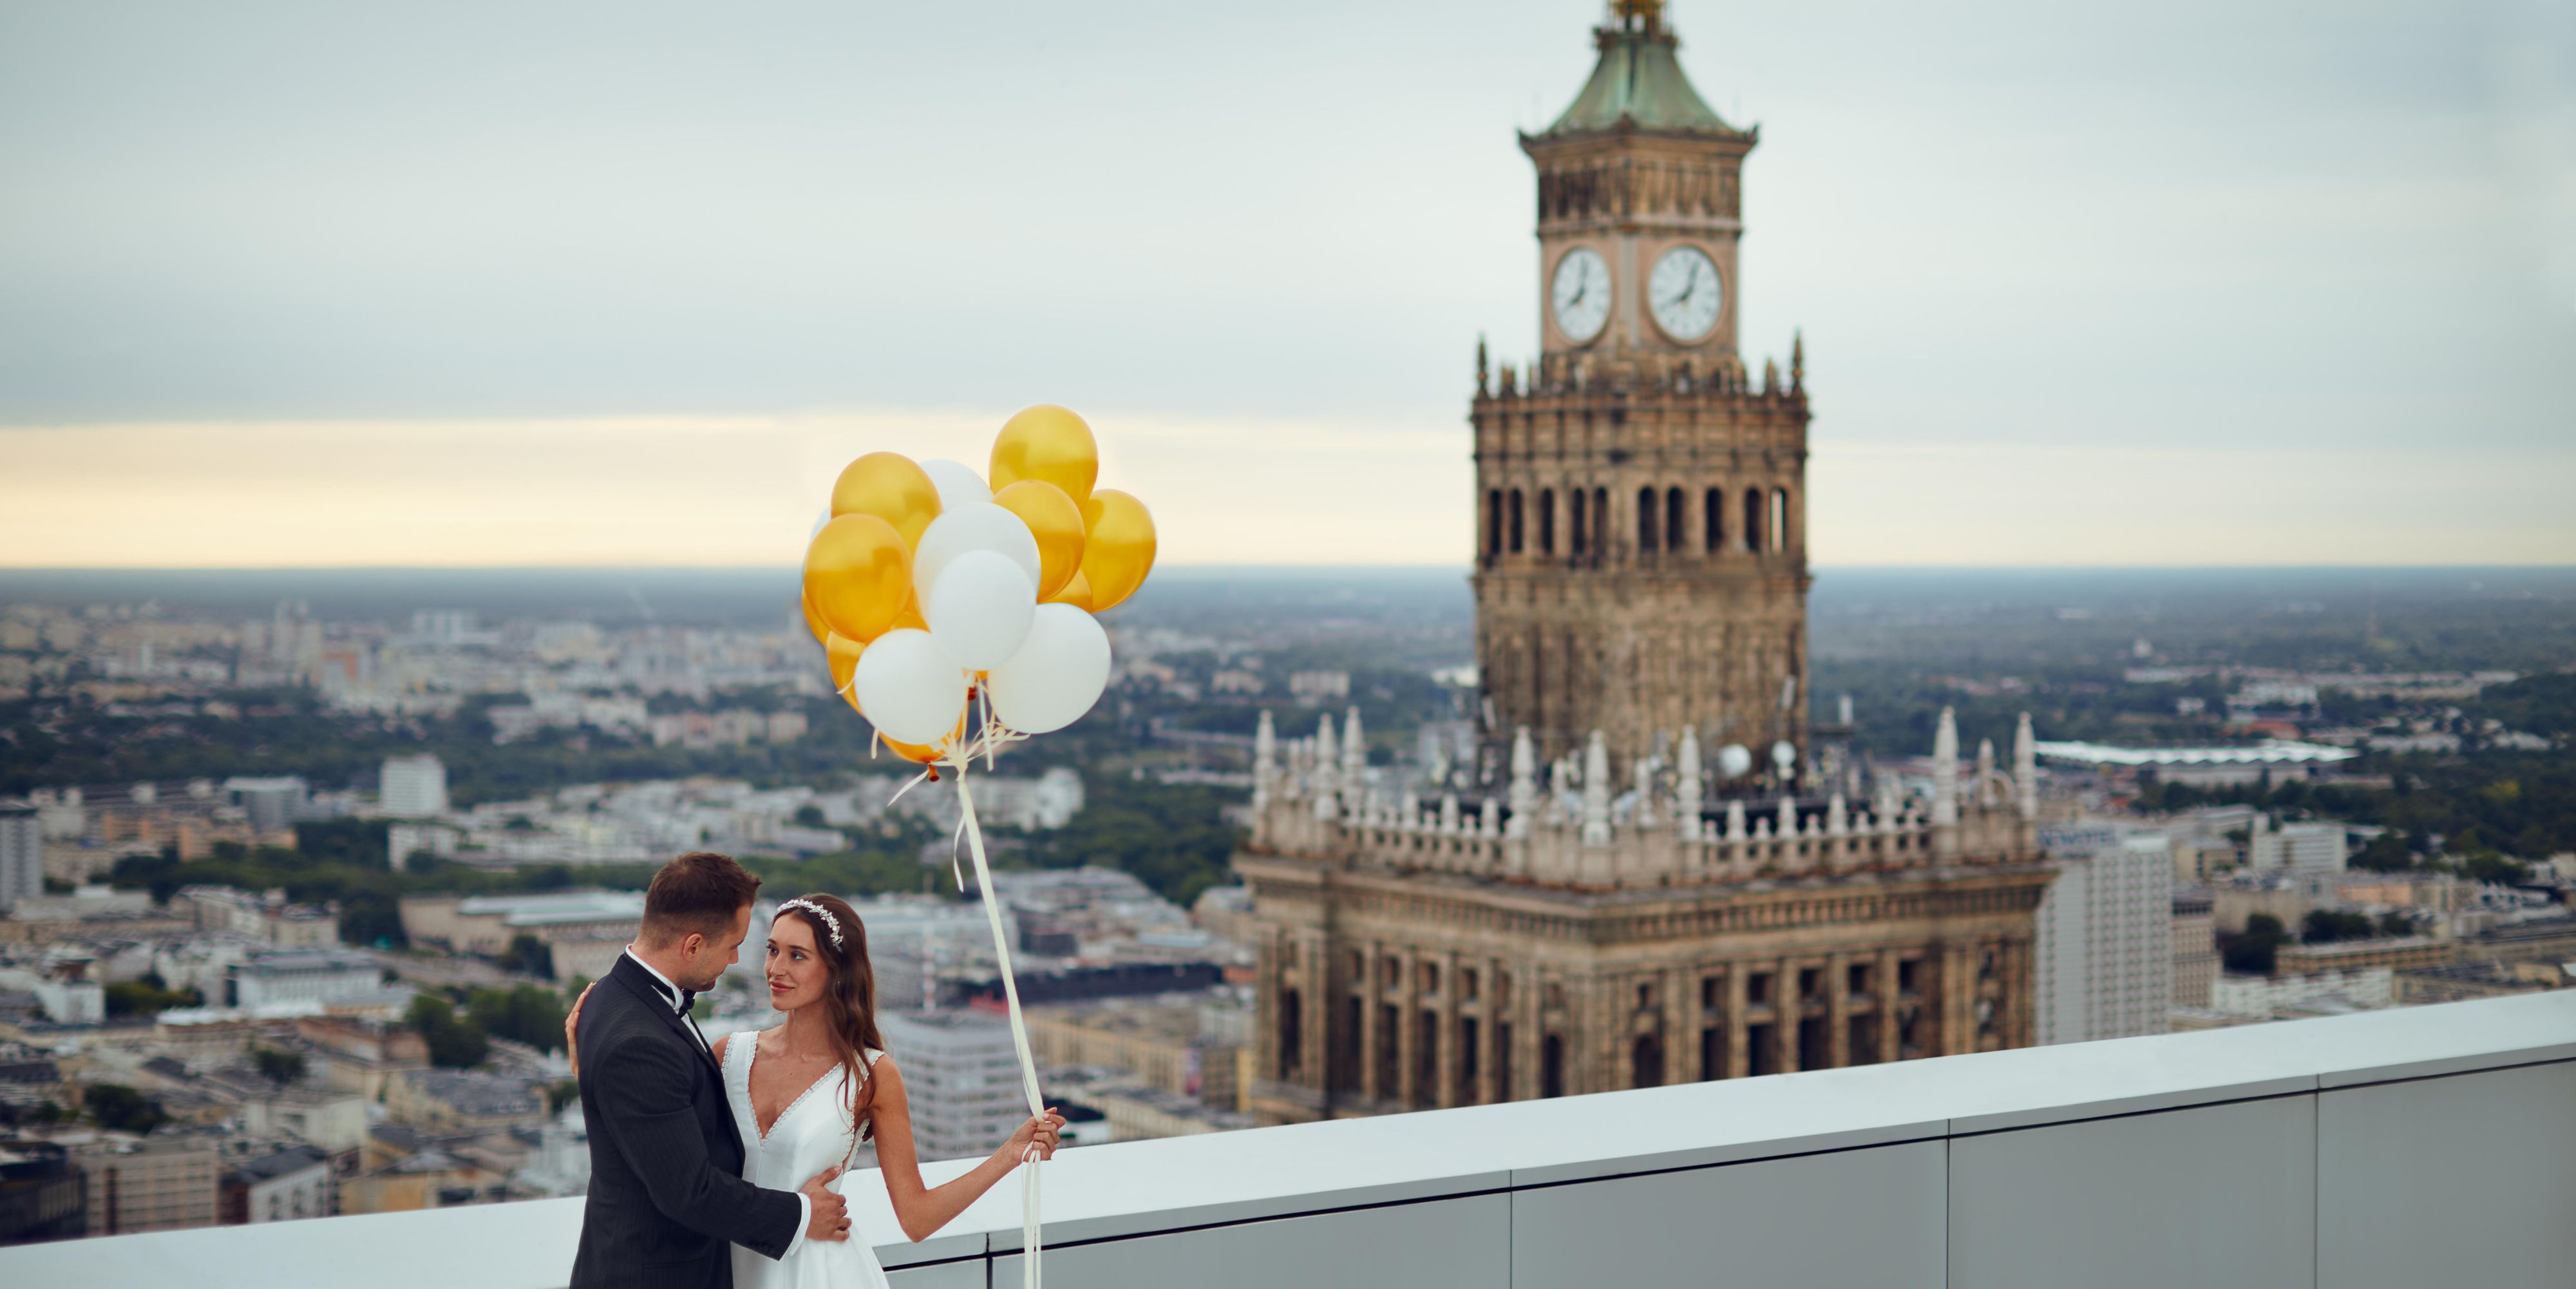 InterContinental Warsaw is a place
where your dream wedding
becomes a reality. Our expert team is committed, flexible, and experienced, ready to exceed your expectations and help you plan your perfect day. 

